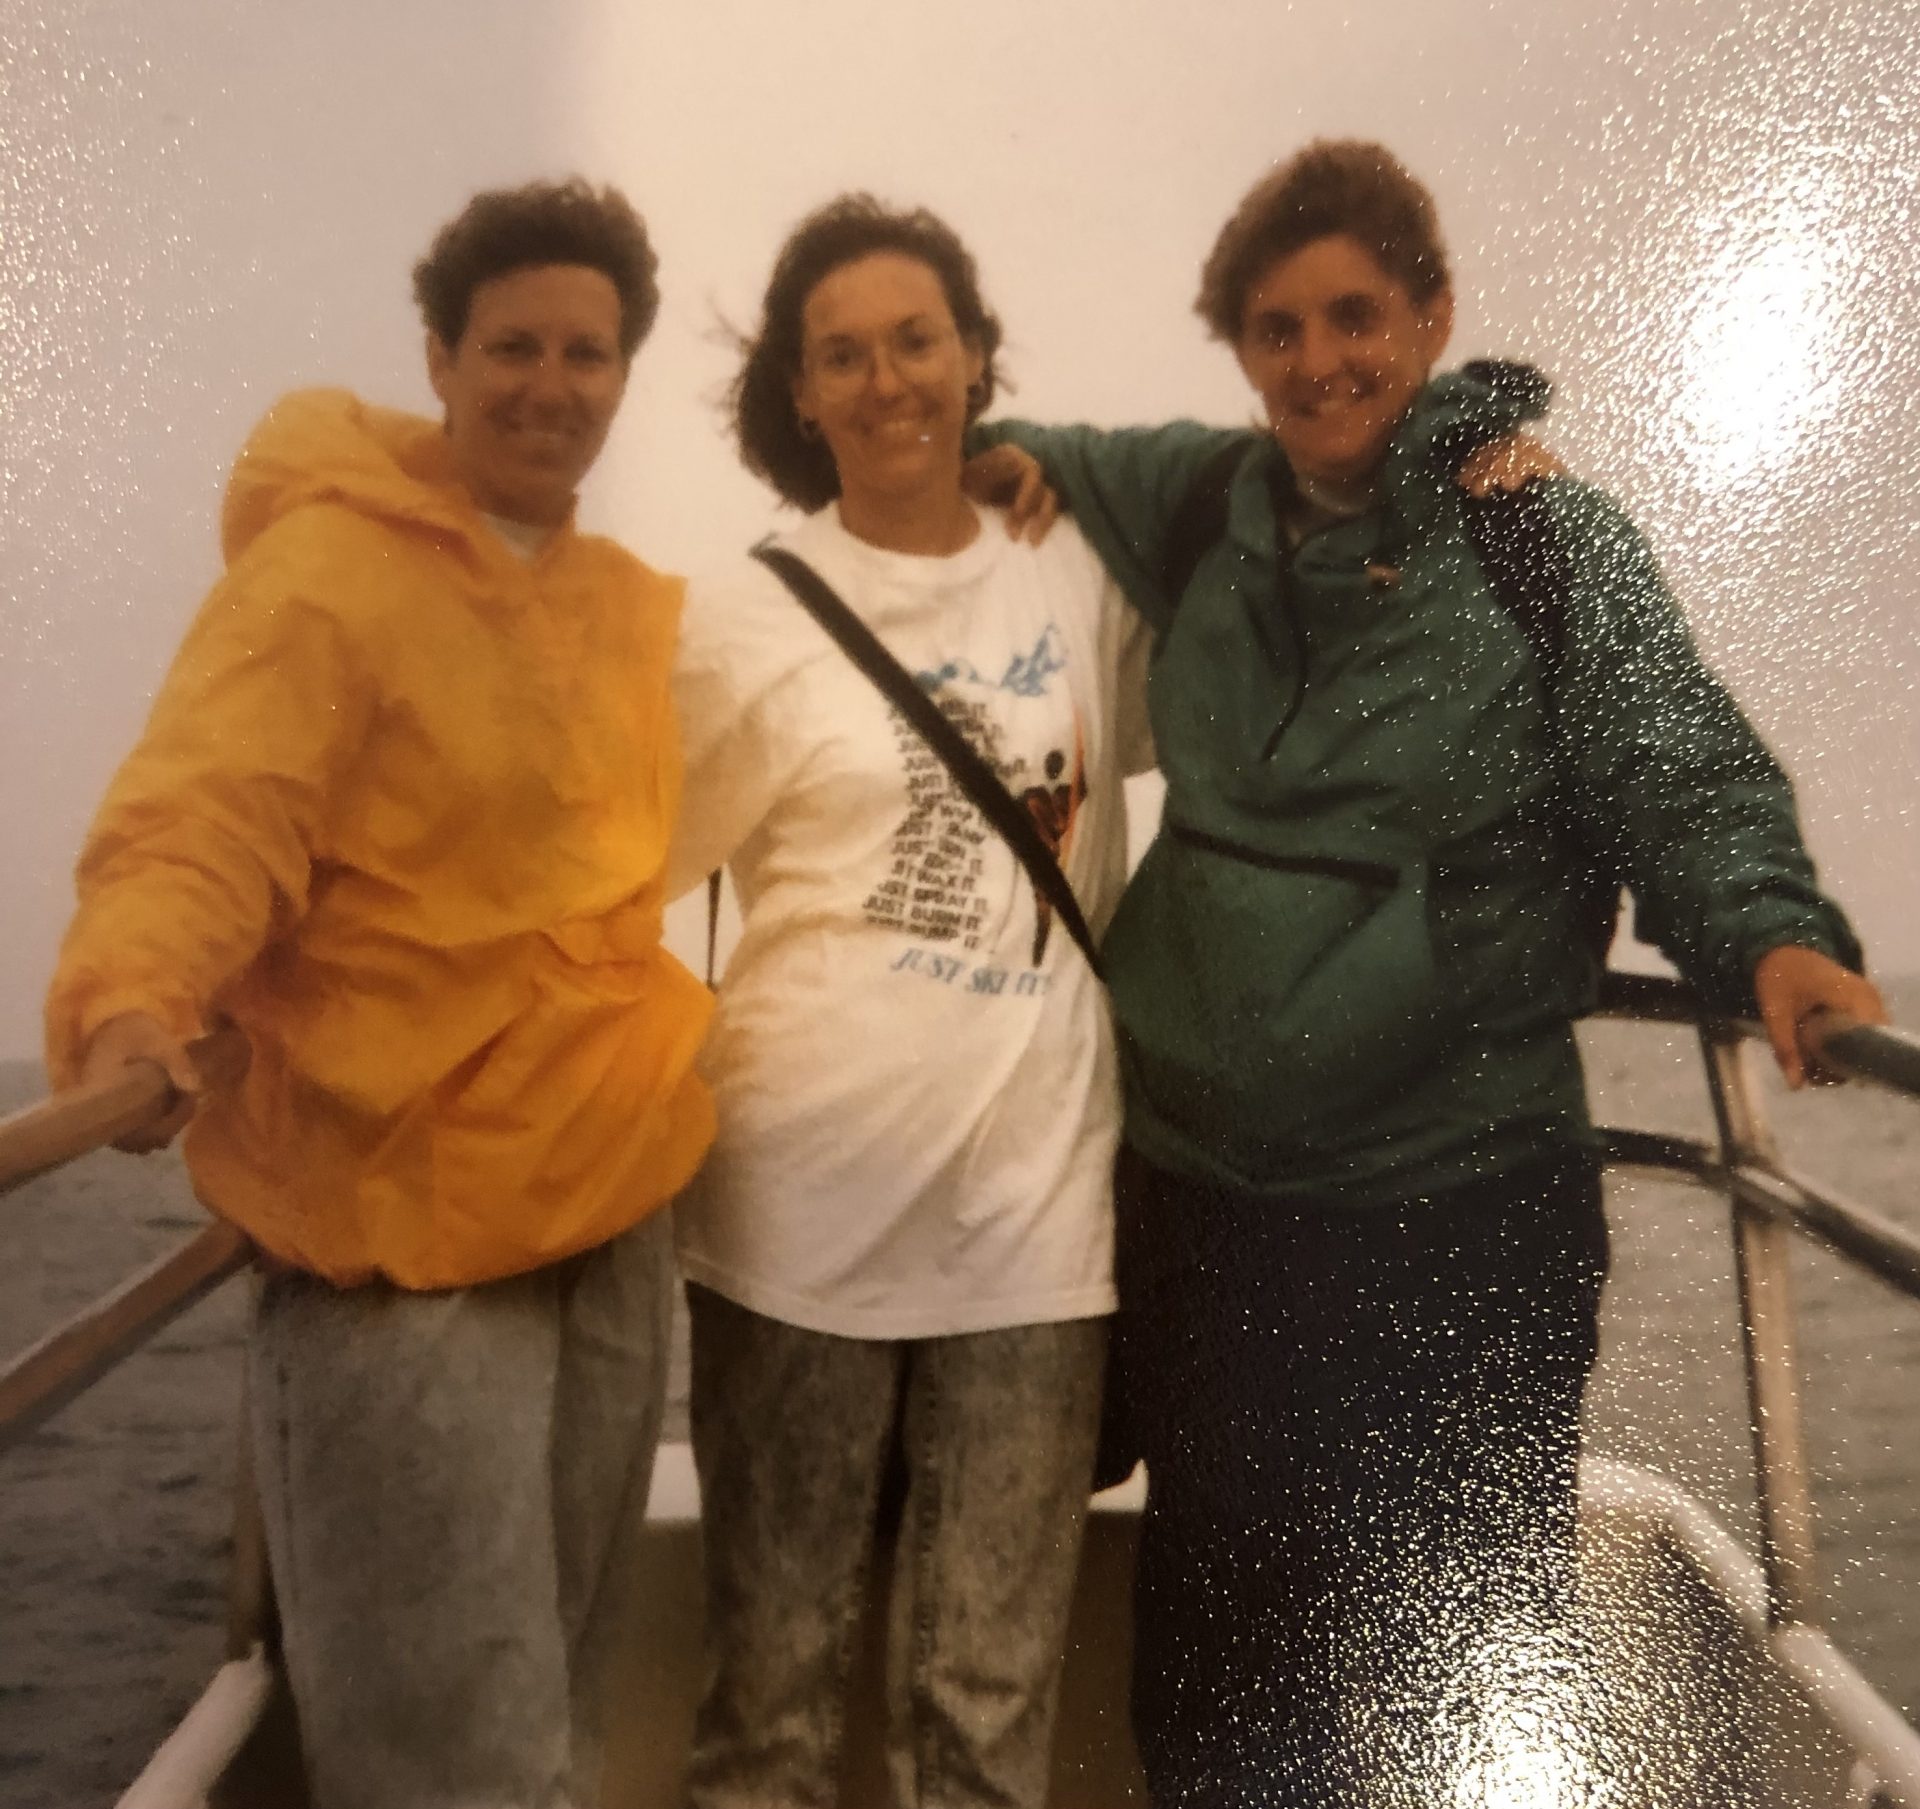 A friend since college days, we shared many great times including whale watching in the early 90s.  I will cherish the memory of our last Raquette Lake Weekend together. Hugs to you Nels